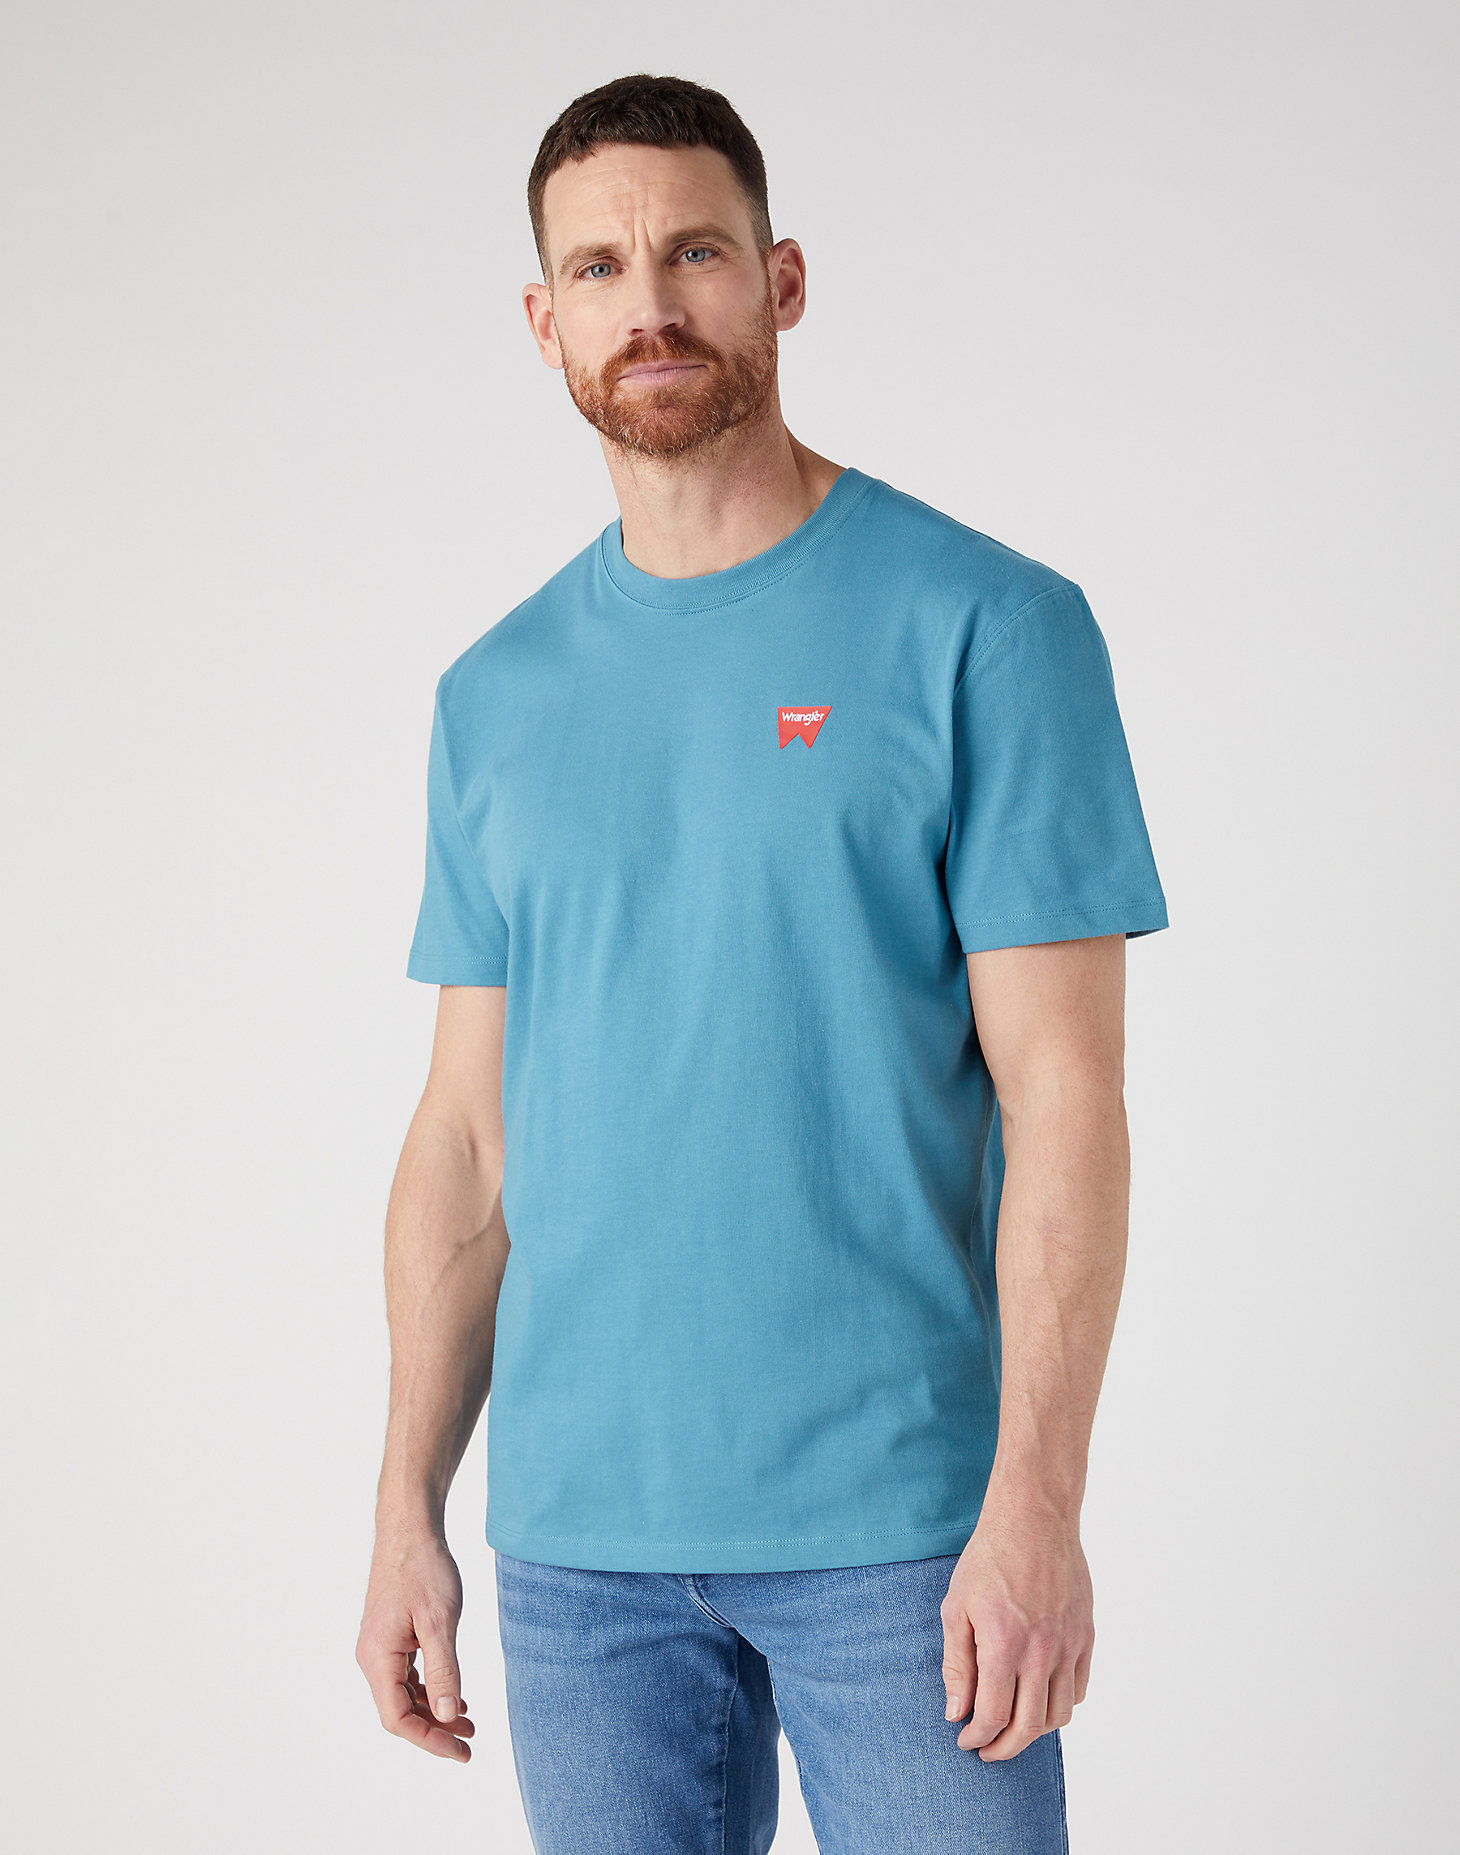 Sign Off Tee in Storm Blue main view